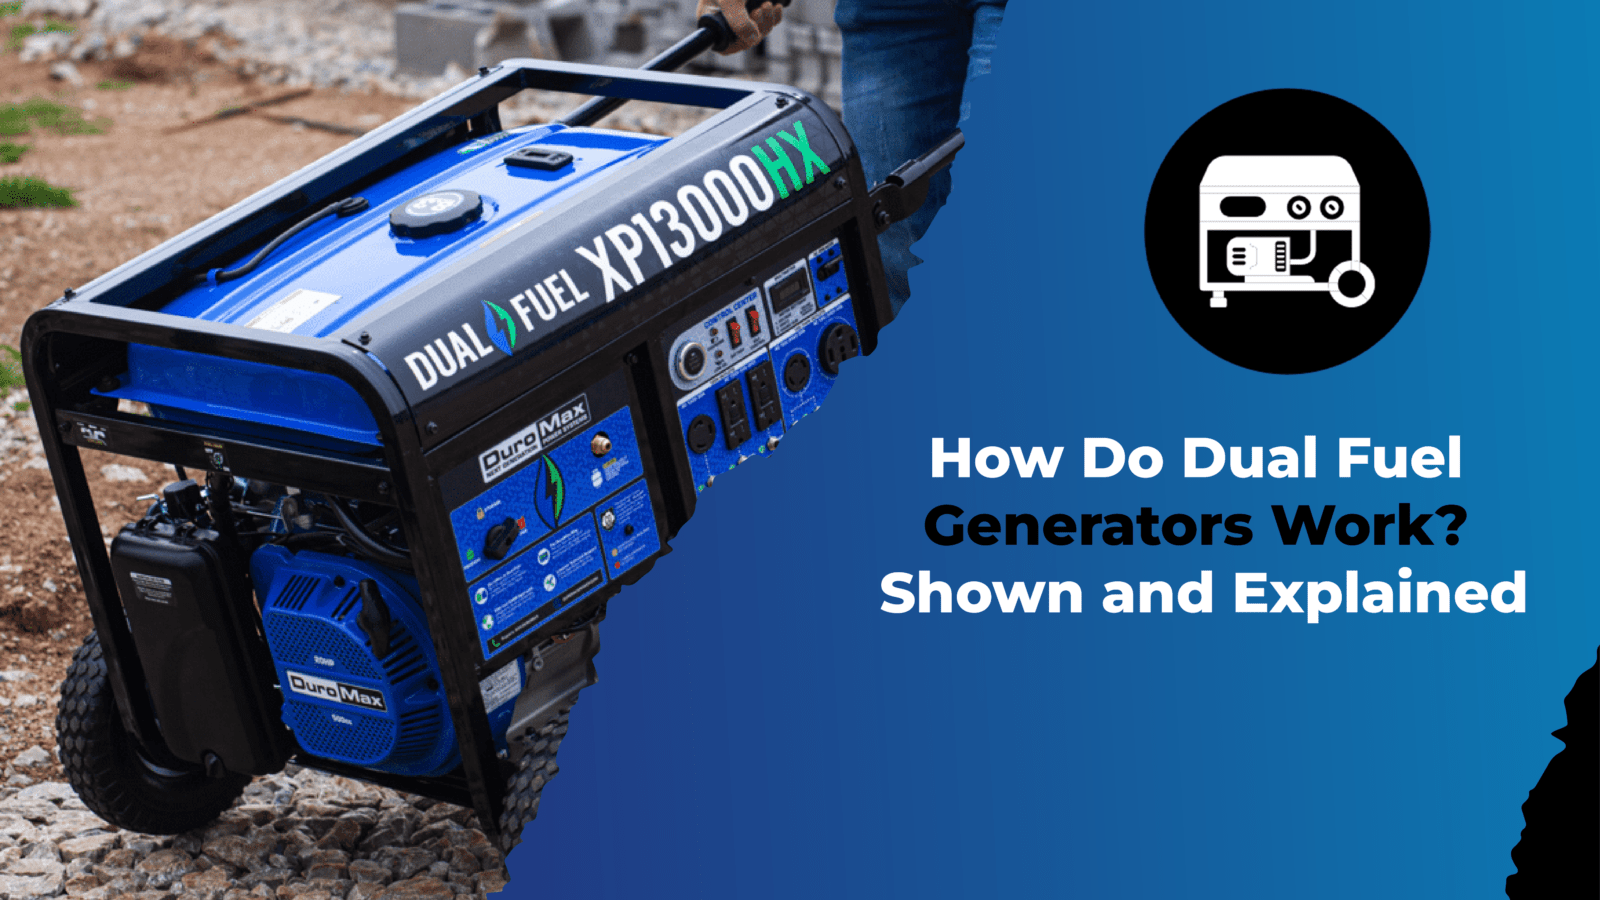 How Do Dual Fuel Generators Work Shown and Explained